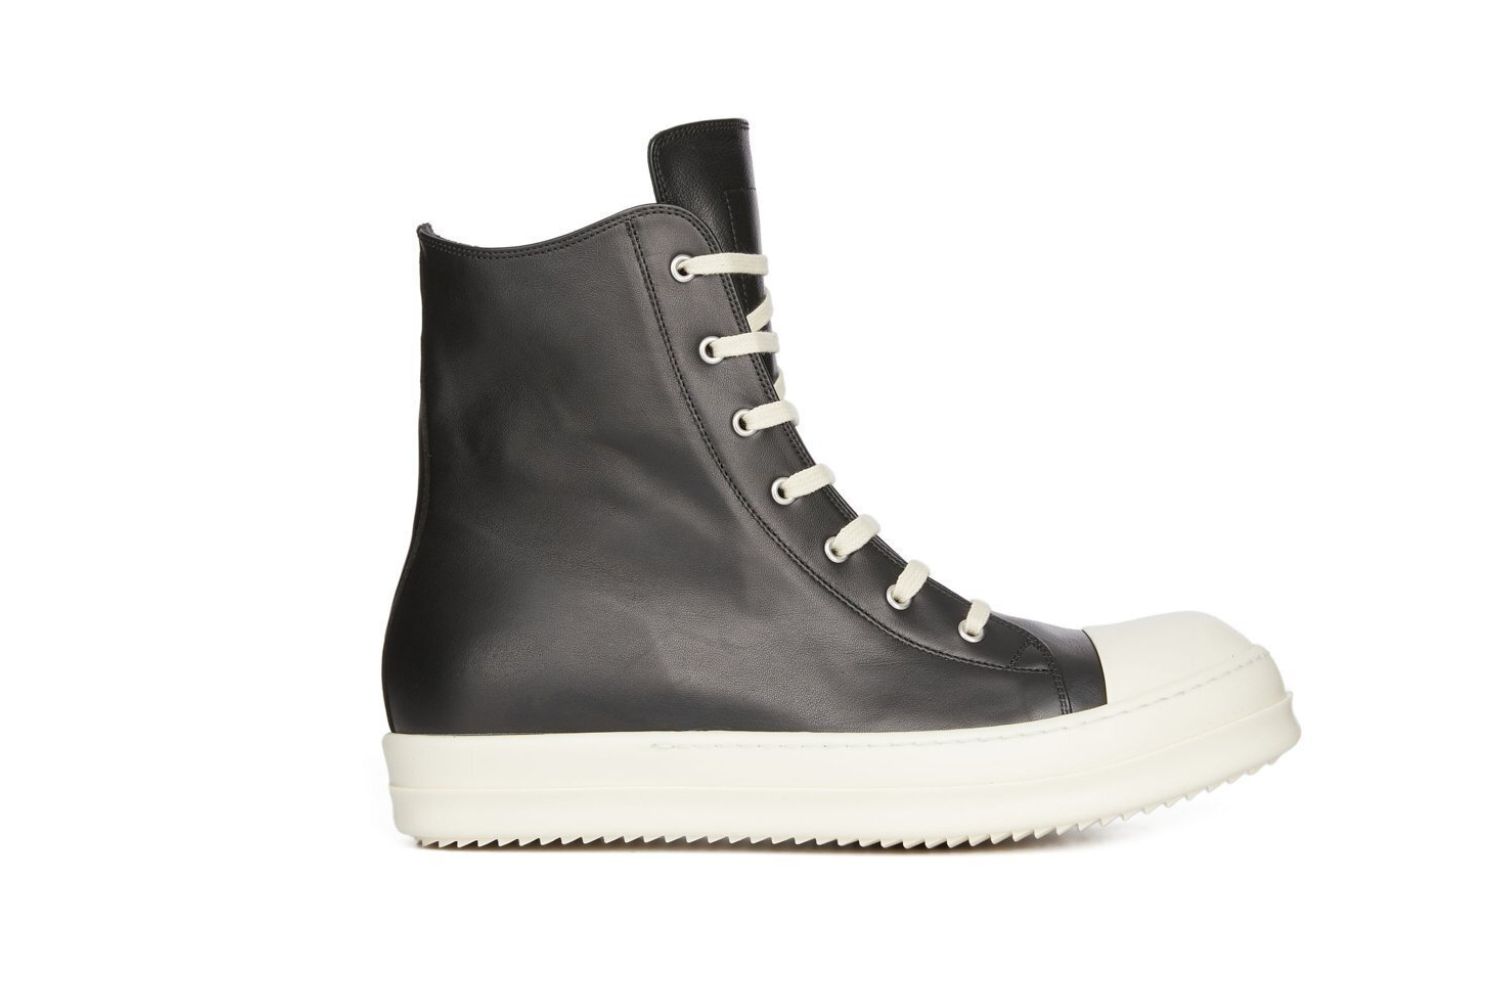 Rick Owens Sneakers - Facts.net